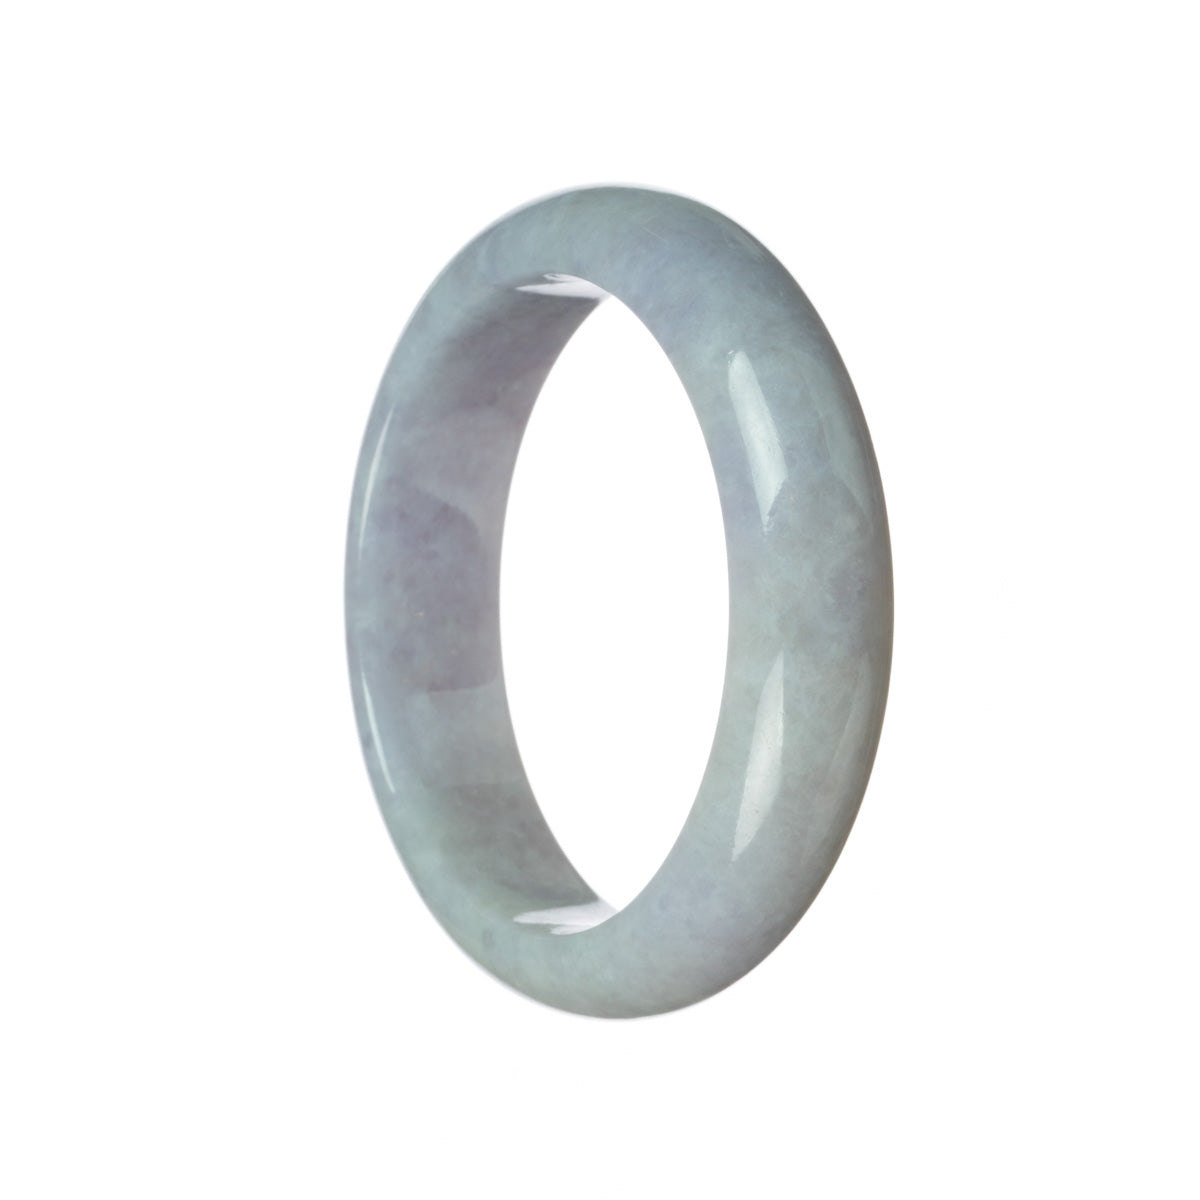 An image of an authentic untreated lavender traditional jade bangle with a half-moon shape, measuring 61mm. This bangle is sold by MAYS GEMS.